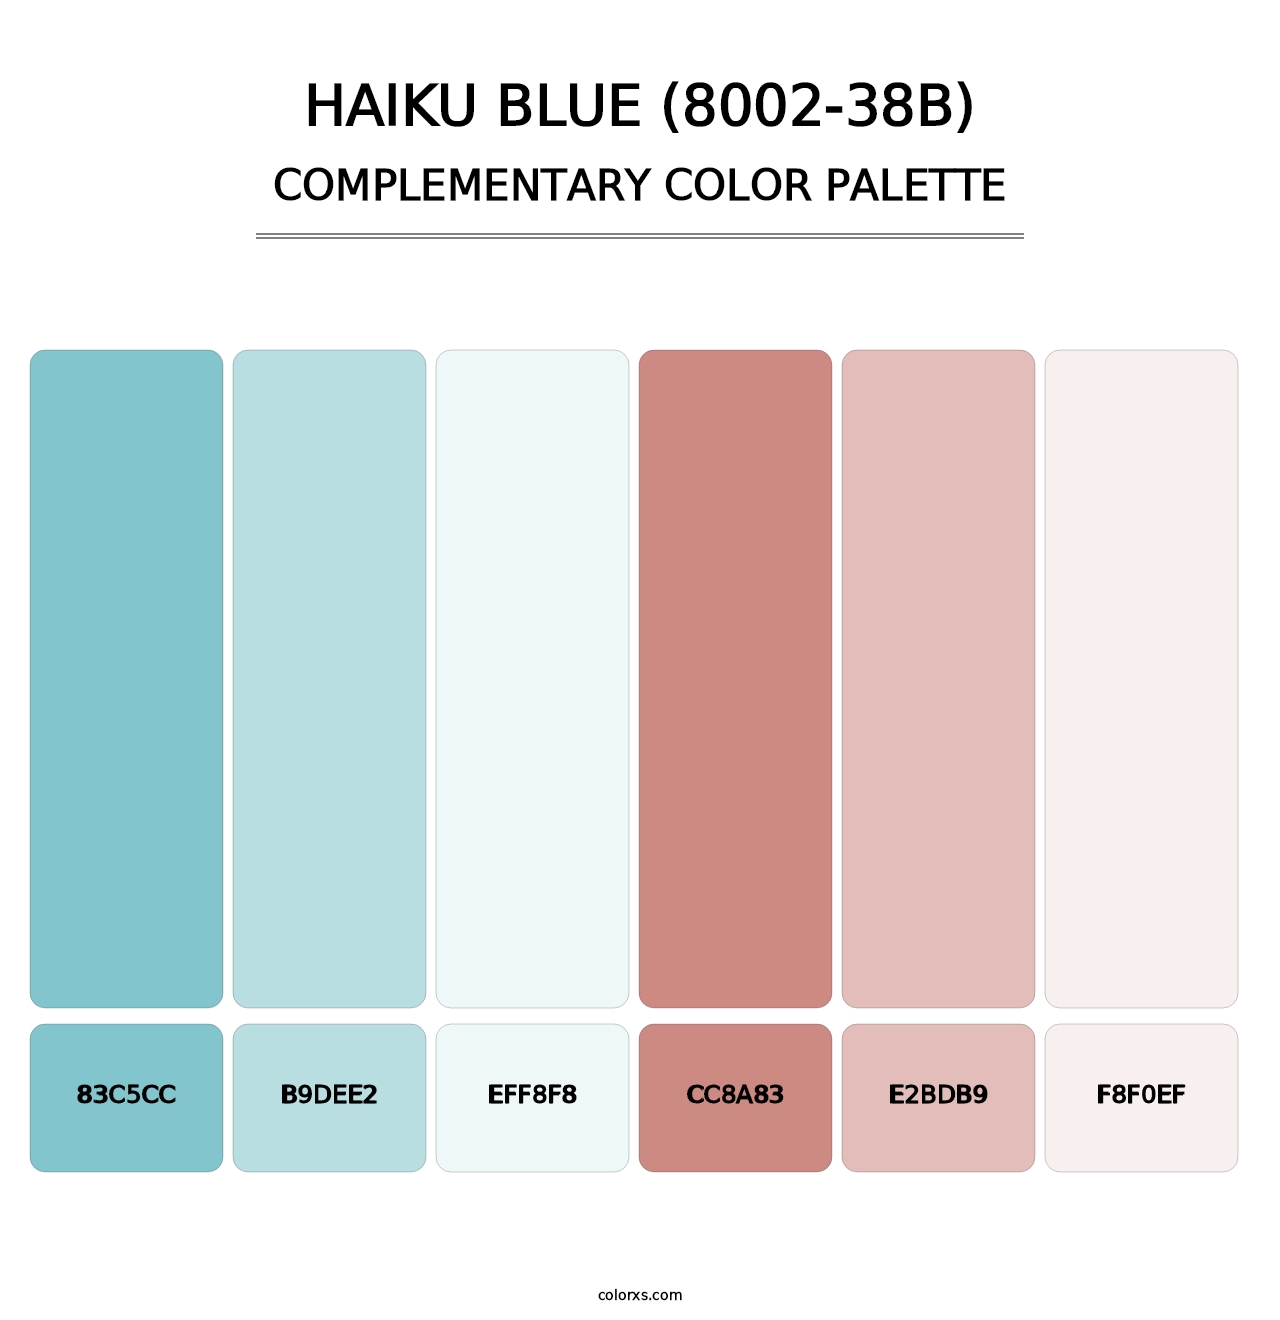 Haiku Blue (8002-38B) - Complementary Color Palette